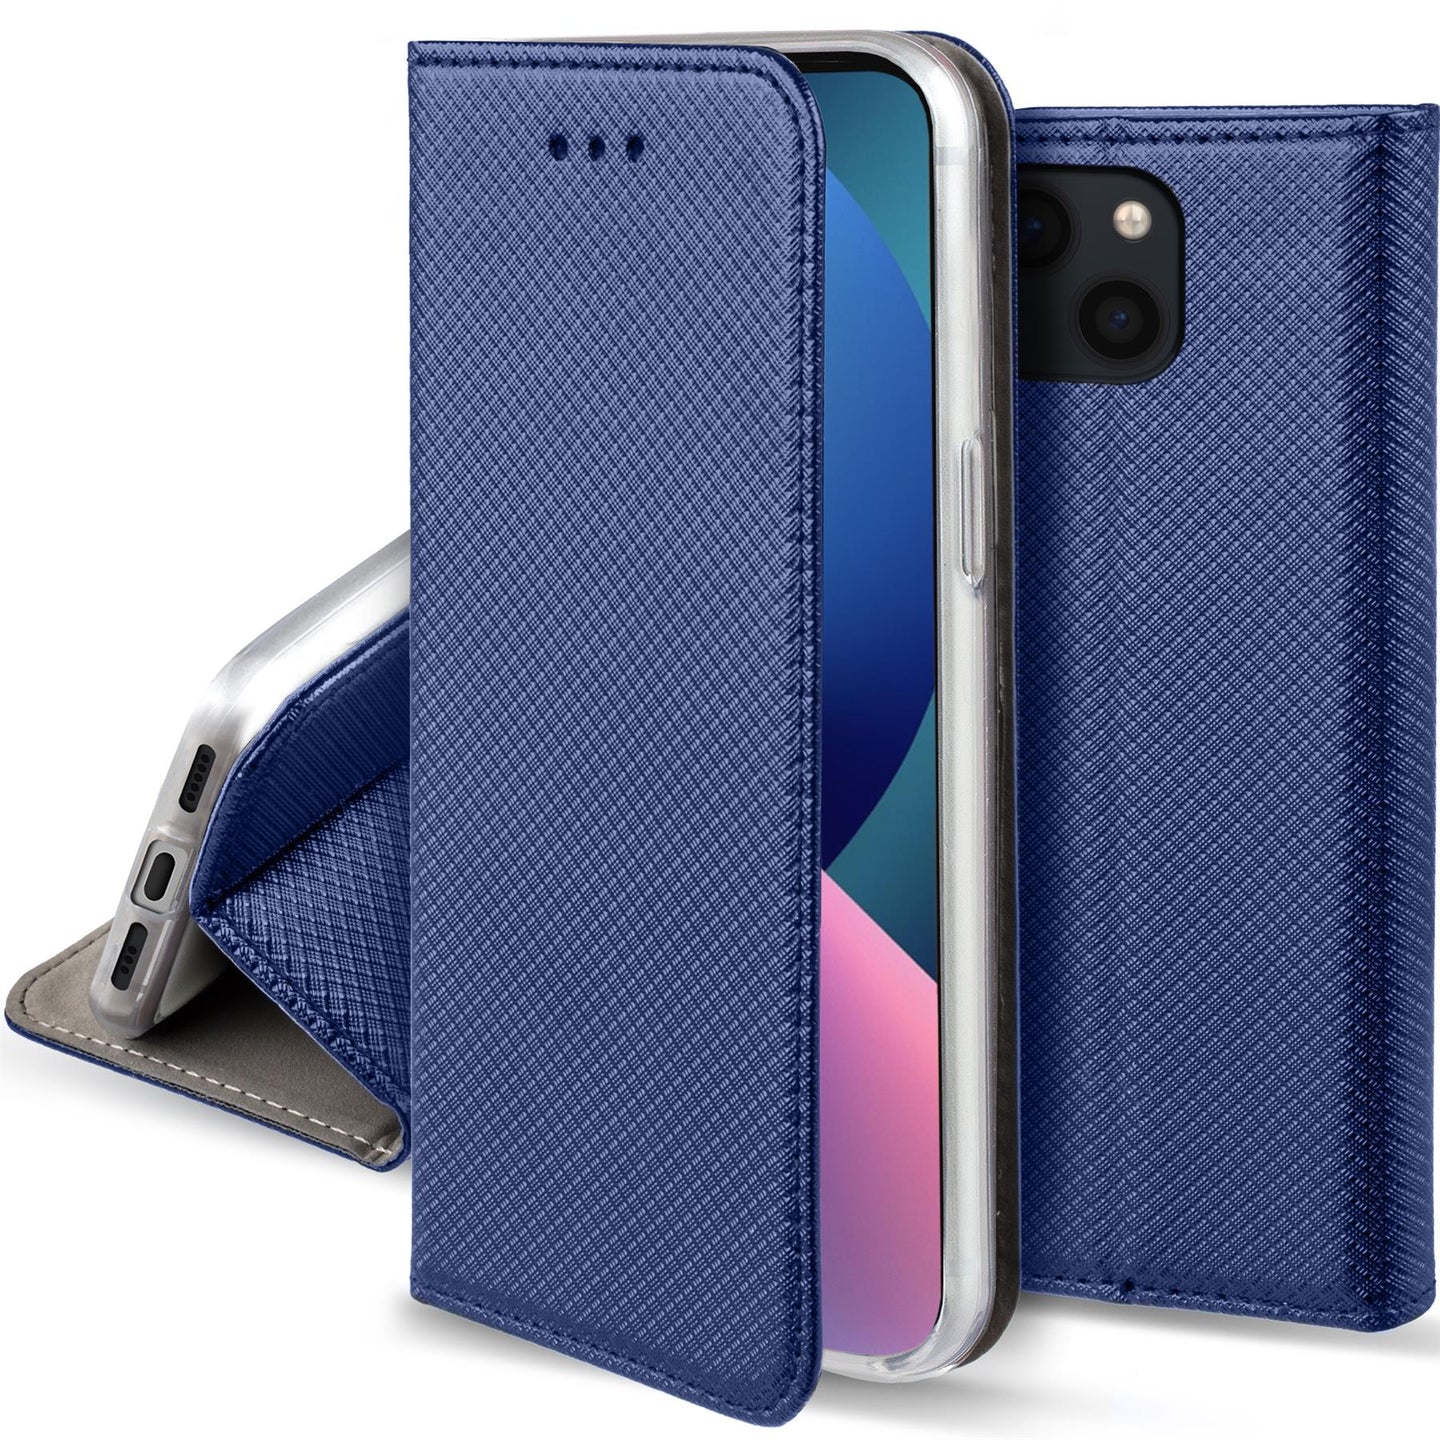 Moozy Case Flip Cover for iPhone 13, Dark Blue - Smart Magnetic Flip Case Flip Folio Wallet Case with Card Holder and Stand, Credit Card Slots10,99